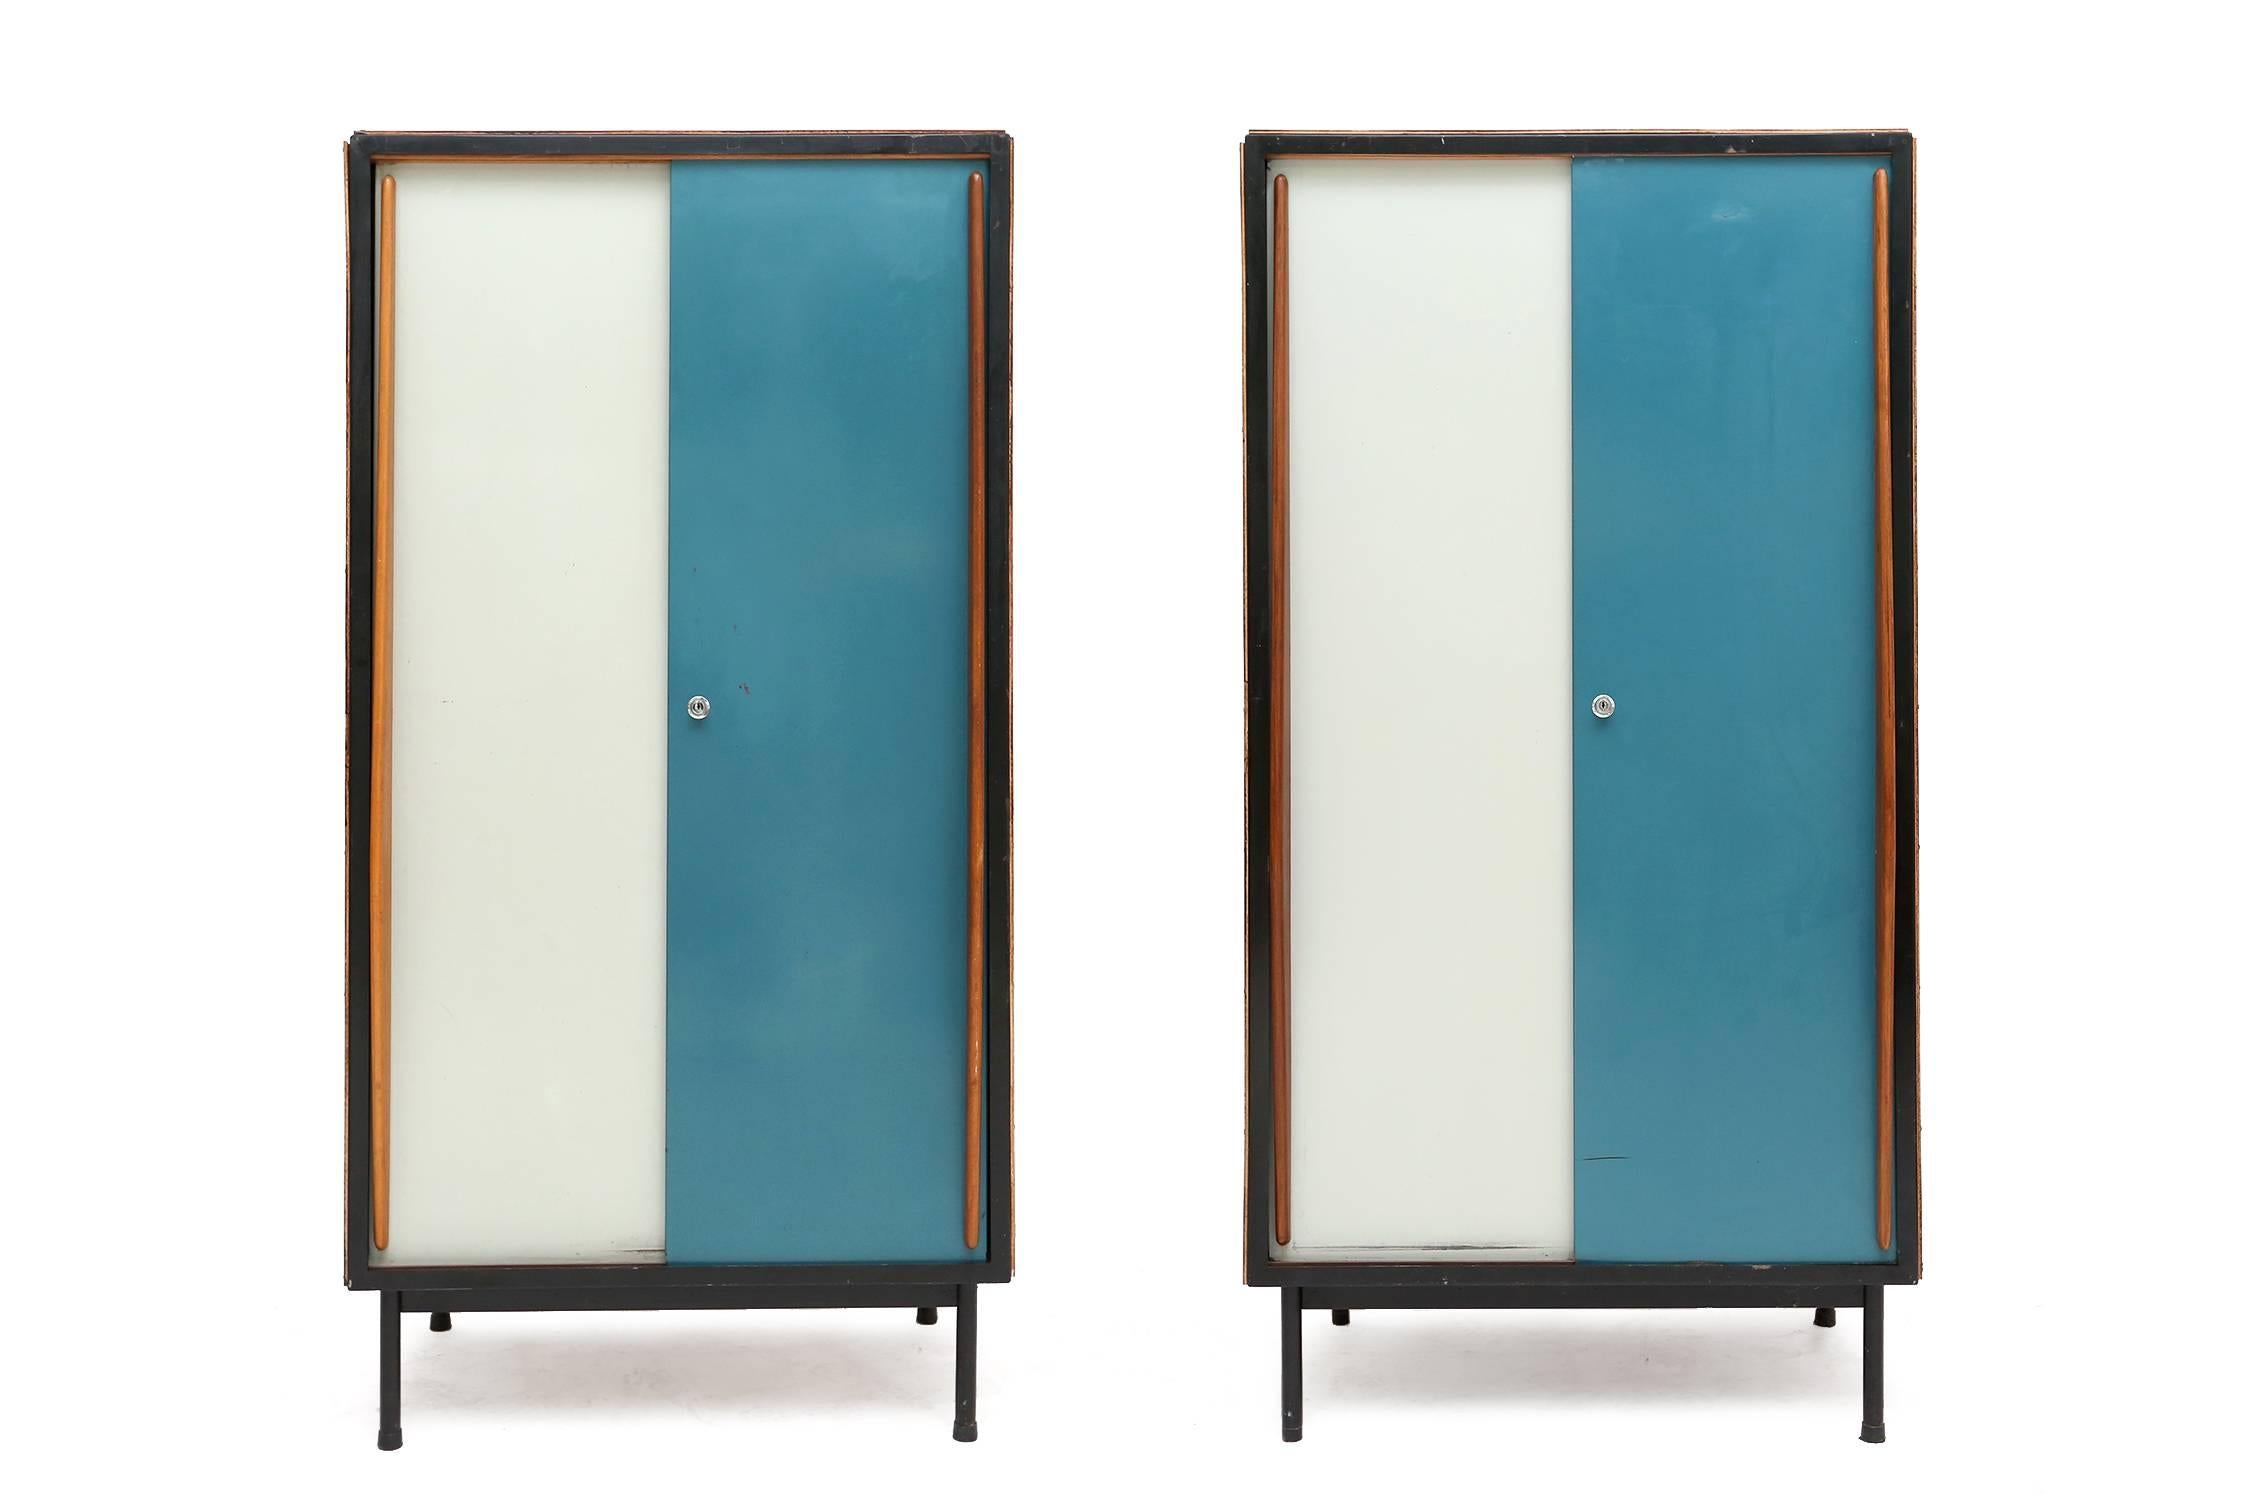 Great pair of storage / wardrobe pieces metal frame and doors
sapelli veneered wooden sides and top.
Willy Van Der Meeren for Tubax,
Belgium, circa 1950.
Would look great in any modernist home, interior or office.
Measures: H 160 cm W 81 cm D